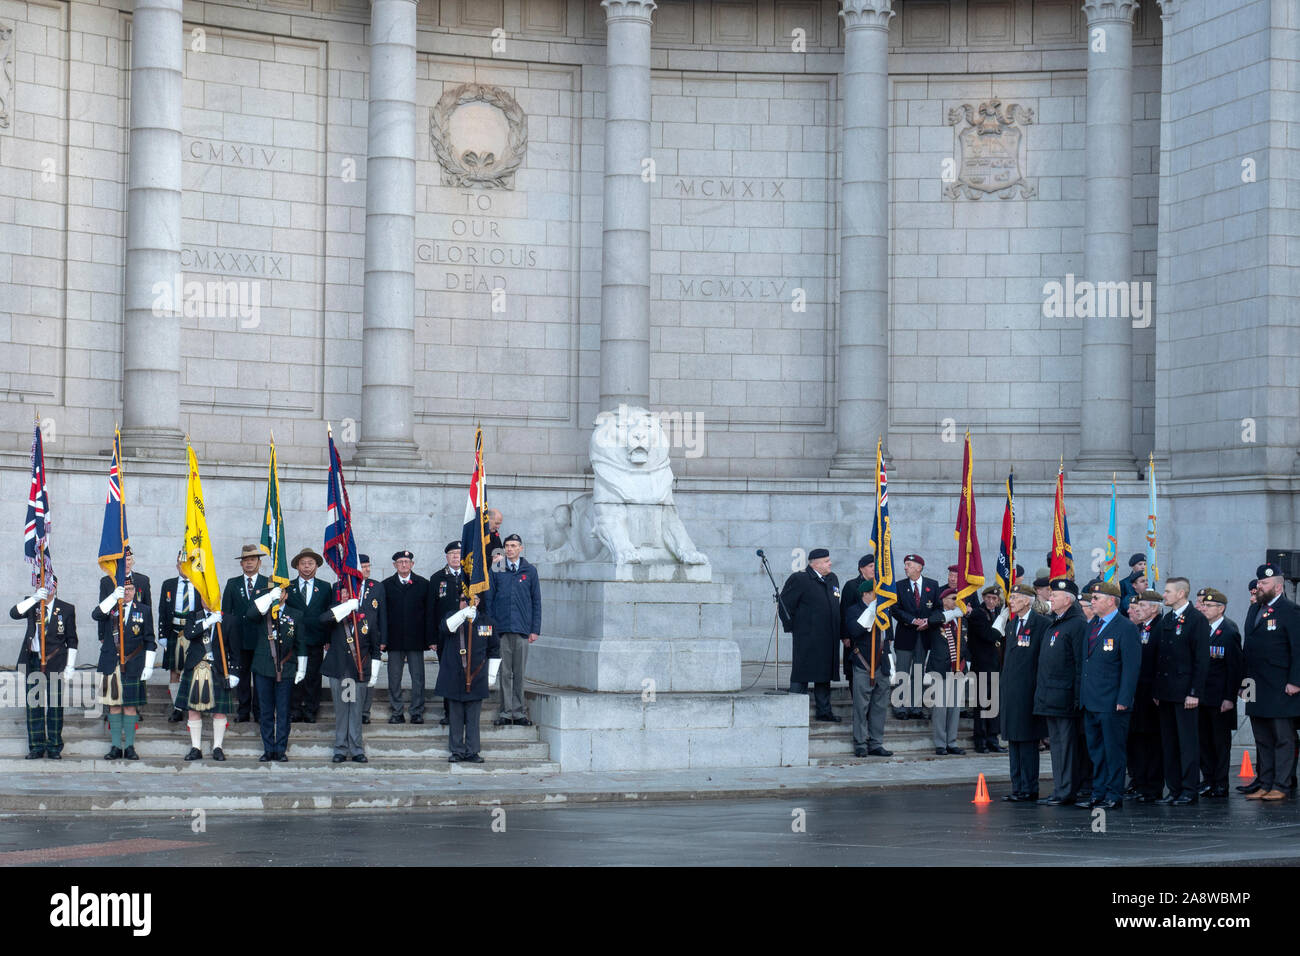 Aberdeen, Scotland - 10th Nov 2019: Veterans and members of the British Armed Forces take part in the annual Remembrance Day ceremony at the Schoolhill War Memorial in Aberdeen. Stock Photo